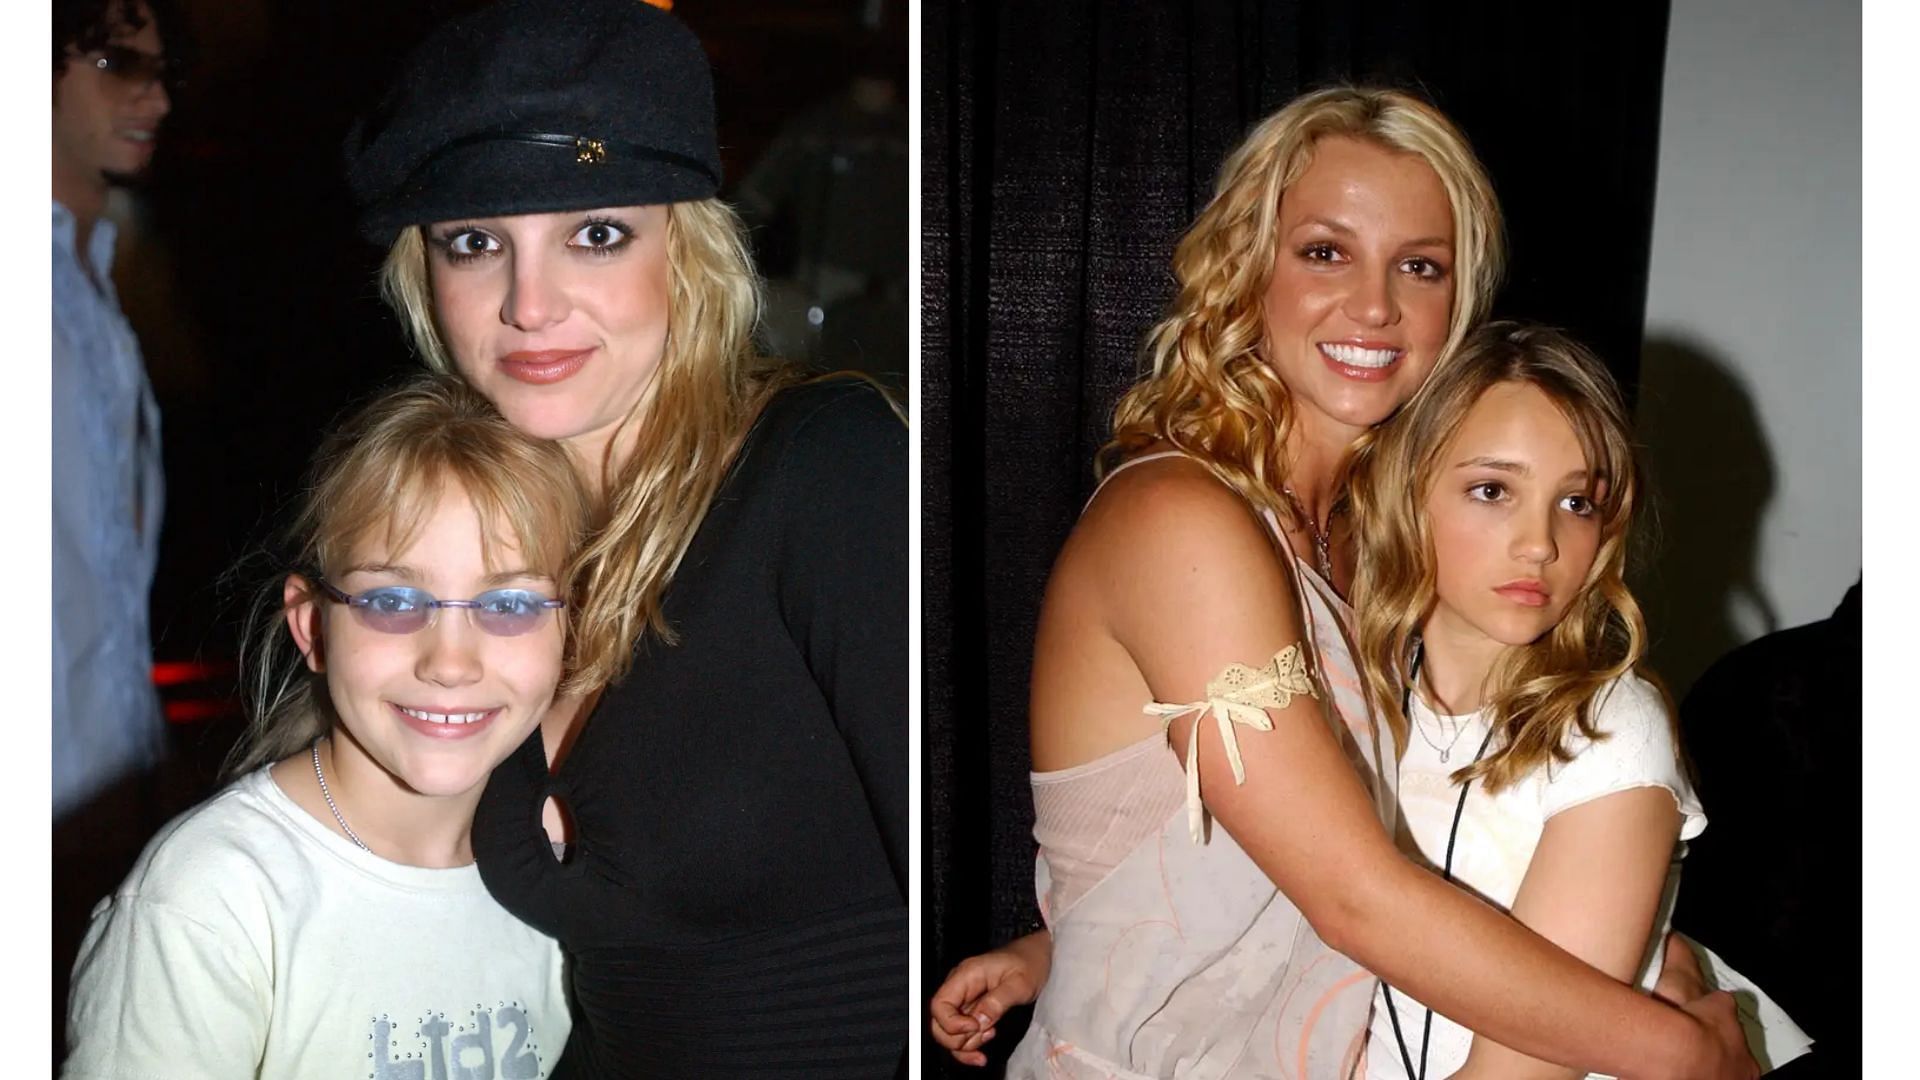 Jamie Lynn and Britney Spears have had a rocky relationship off late (Image via Getty/Jeff Kravitz)